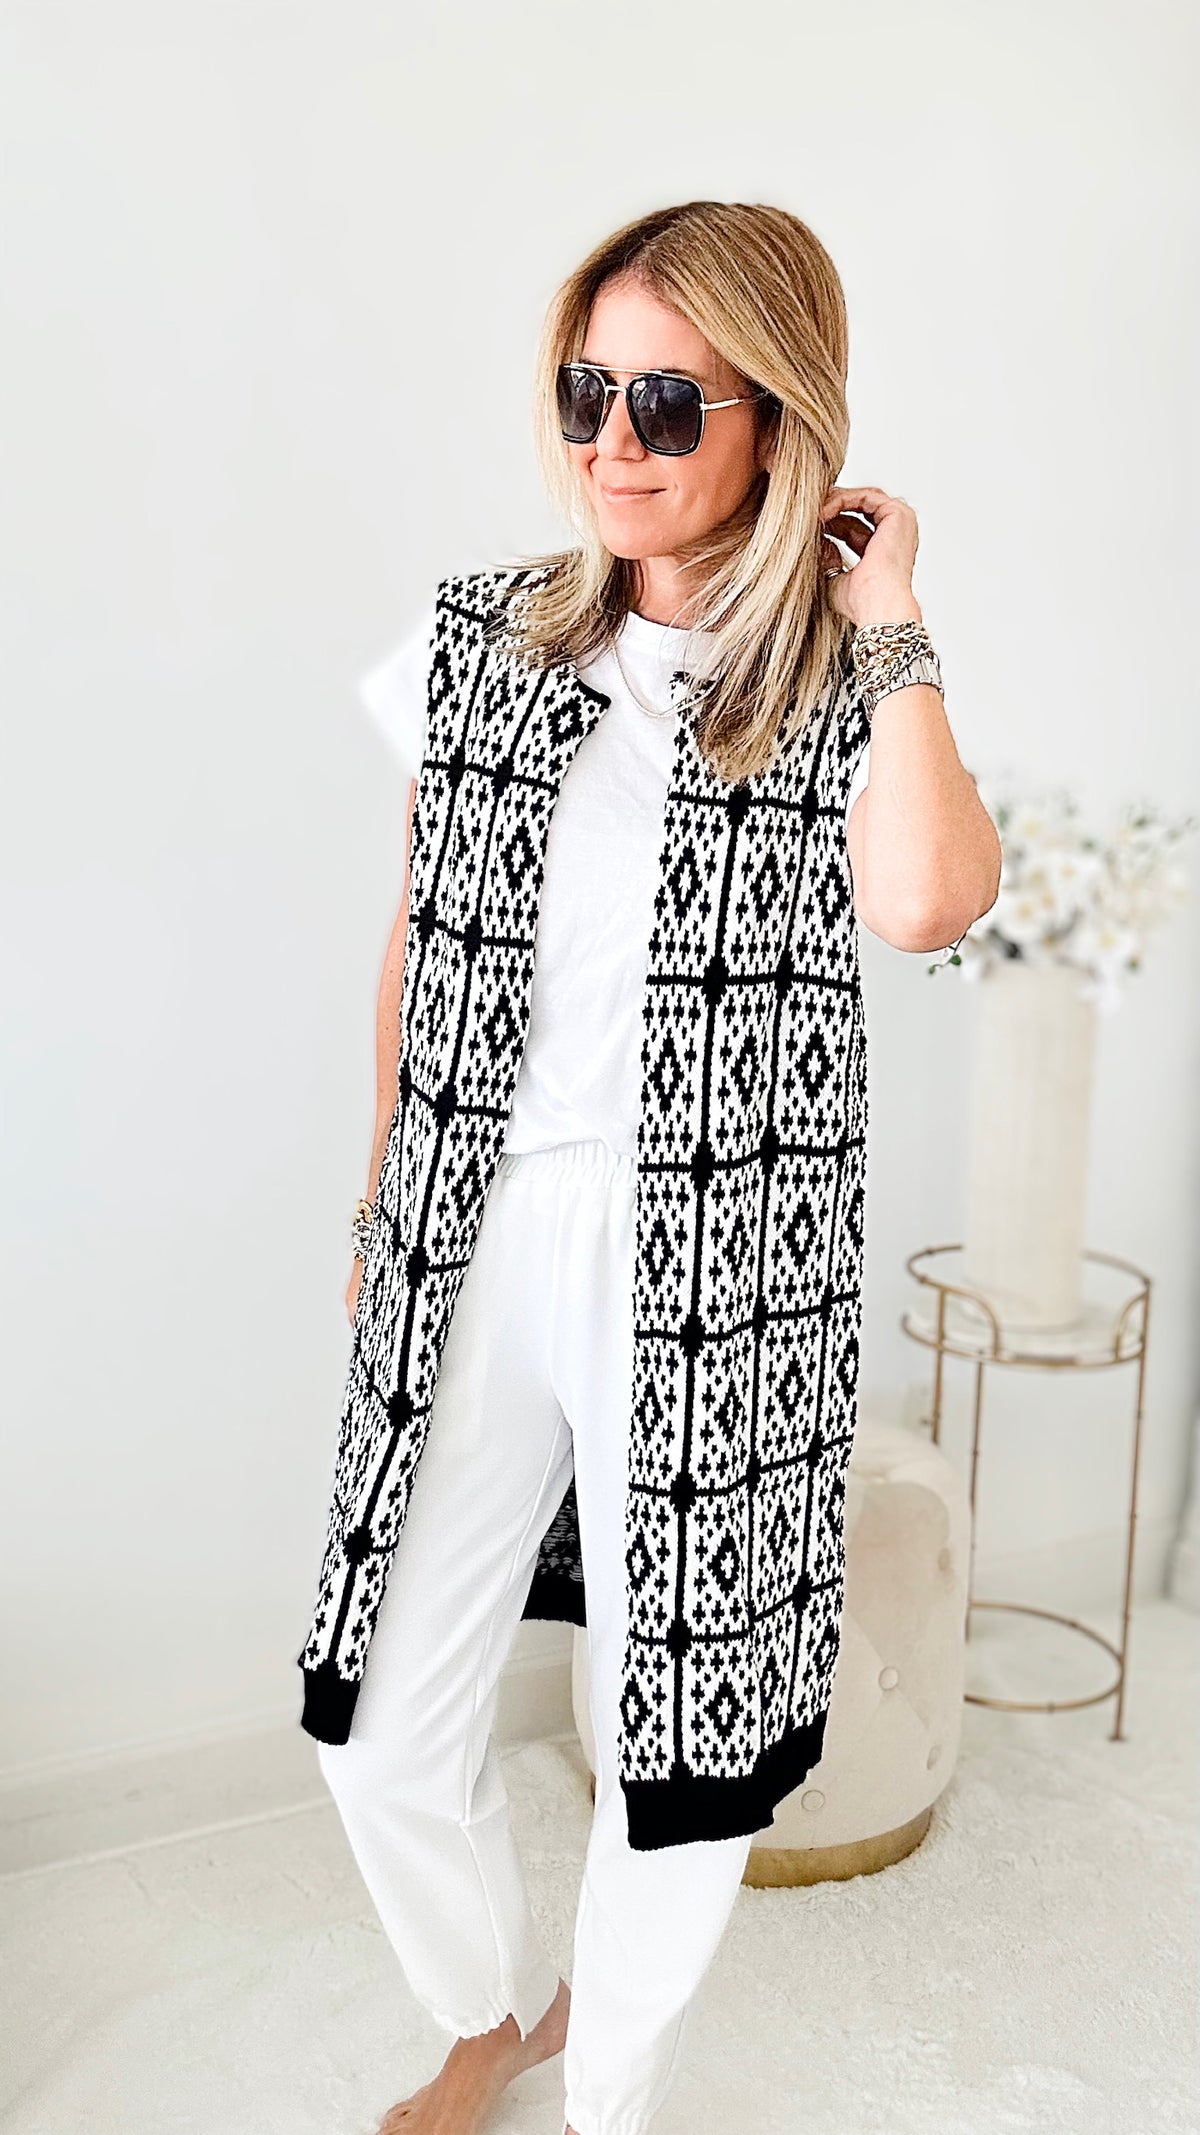 Jacquard Knit Long Cardigan Vest - Black/White-150 Cardigans/Layers-Venti6 Outlet-Coastal Bloom Boutique, find the trendiest versions of the popular styles and looks Located in Indialantic, FL